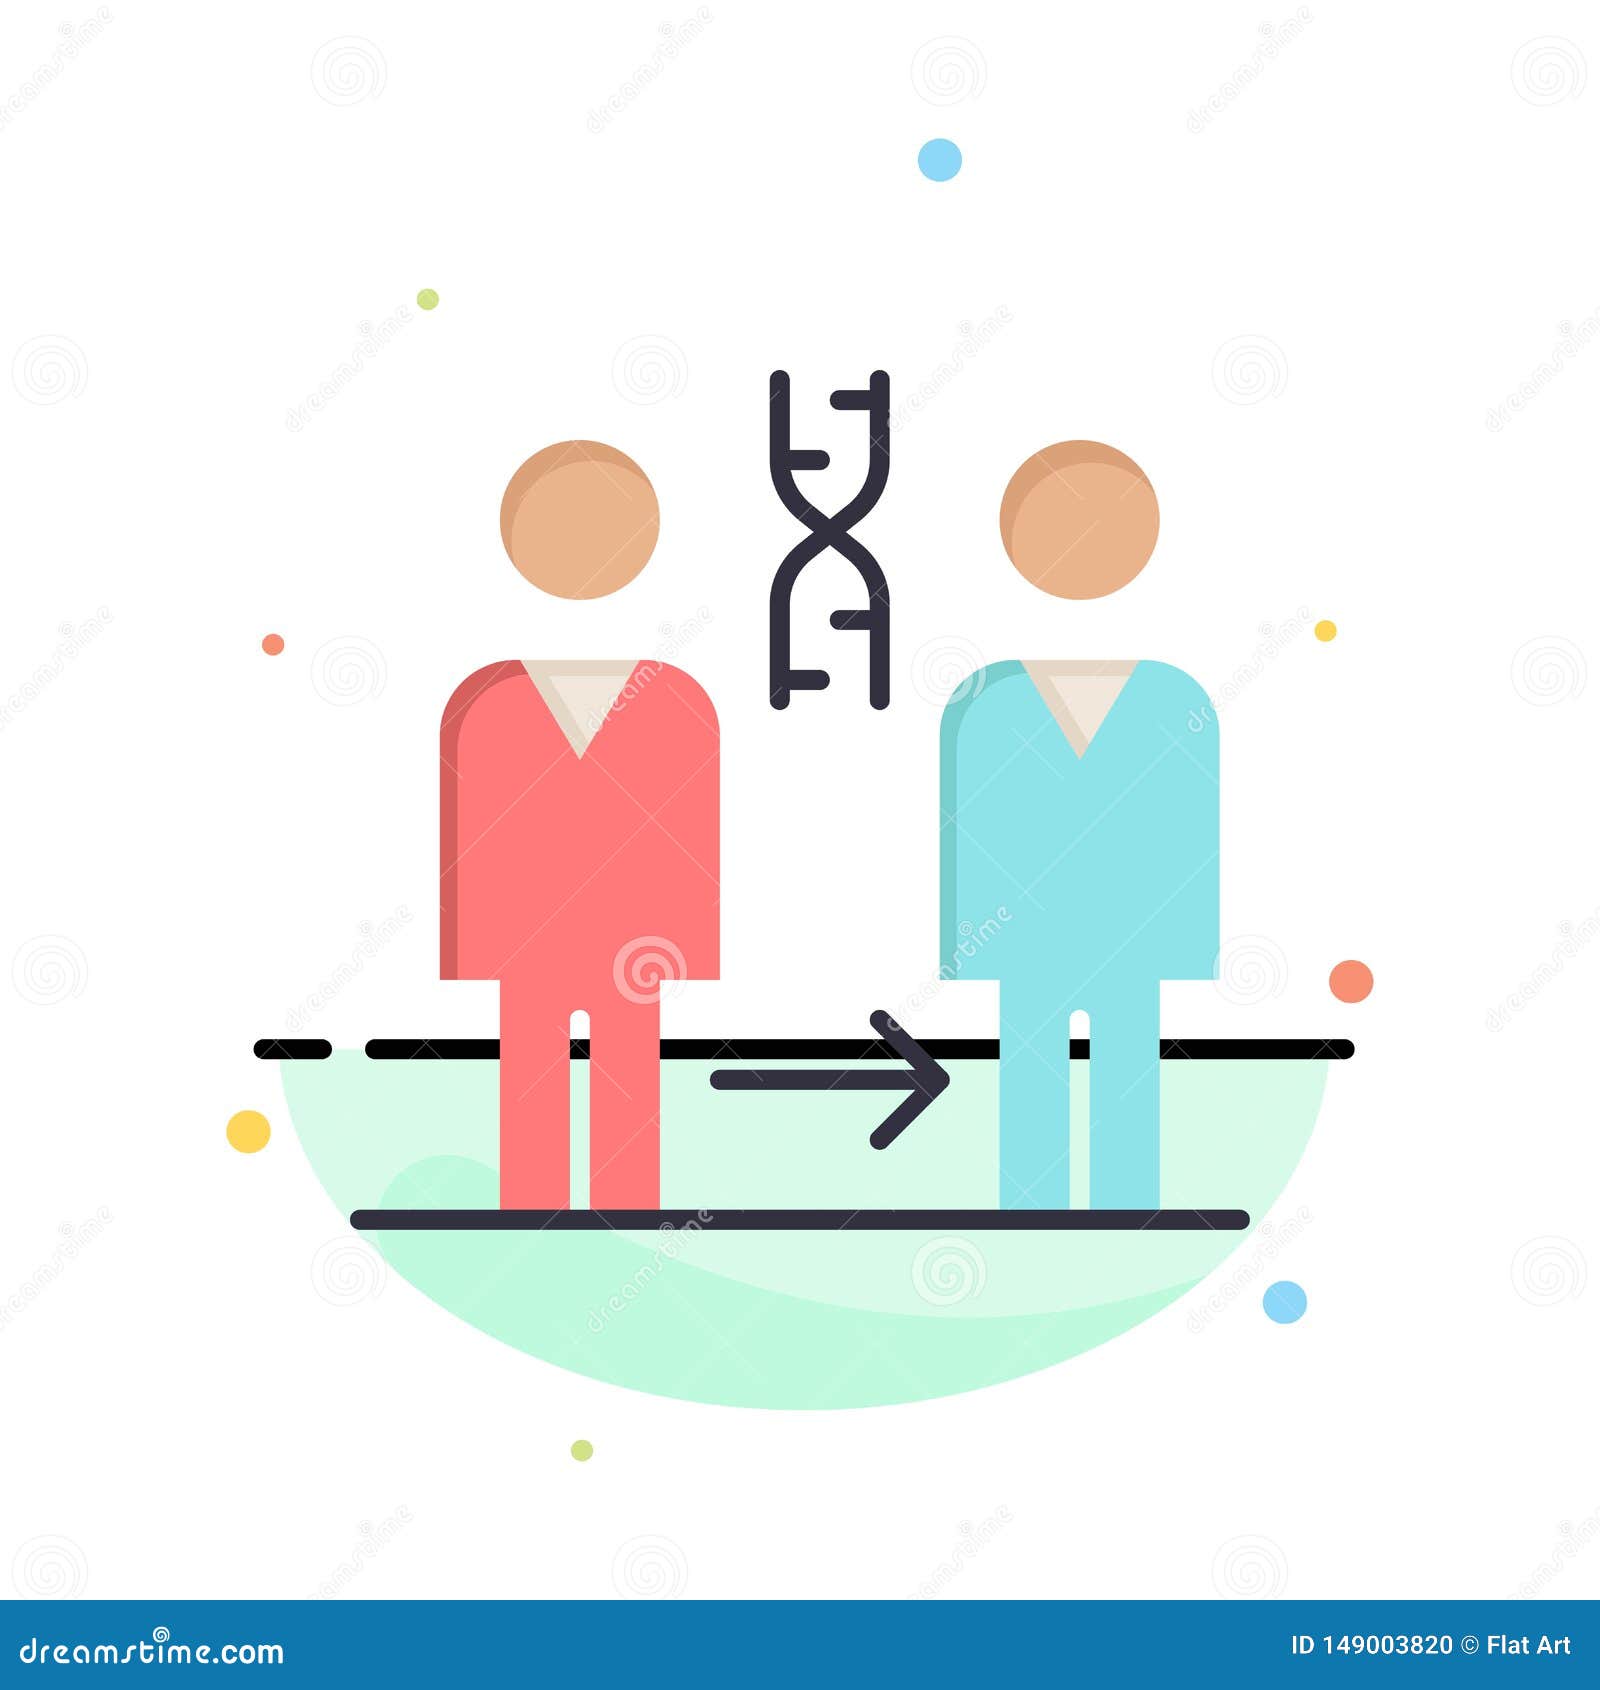 dna, cloning, patient, hospital, health abstract flat color icon template